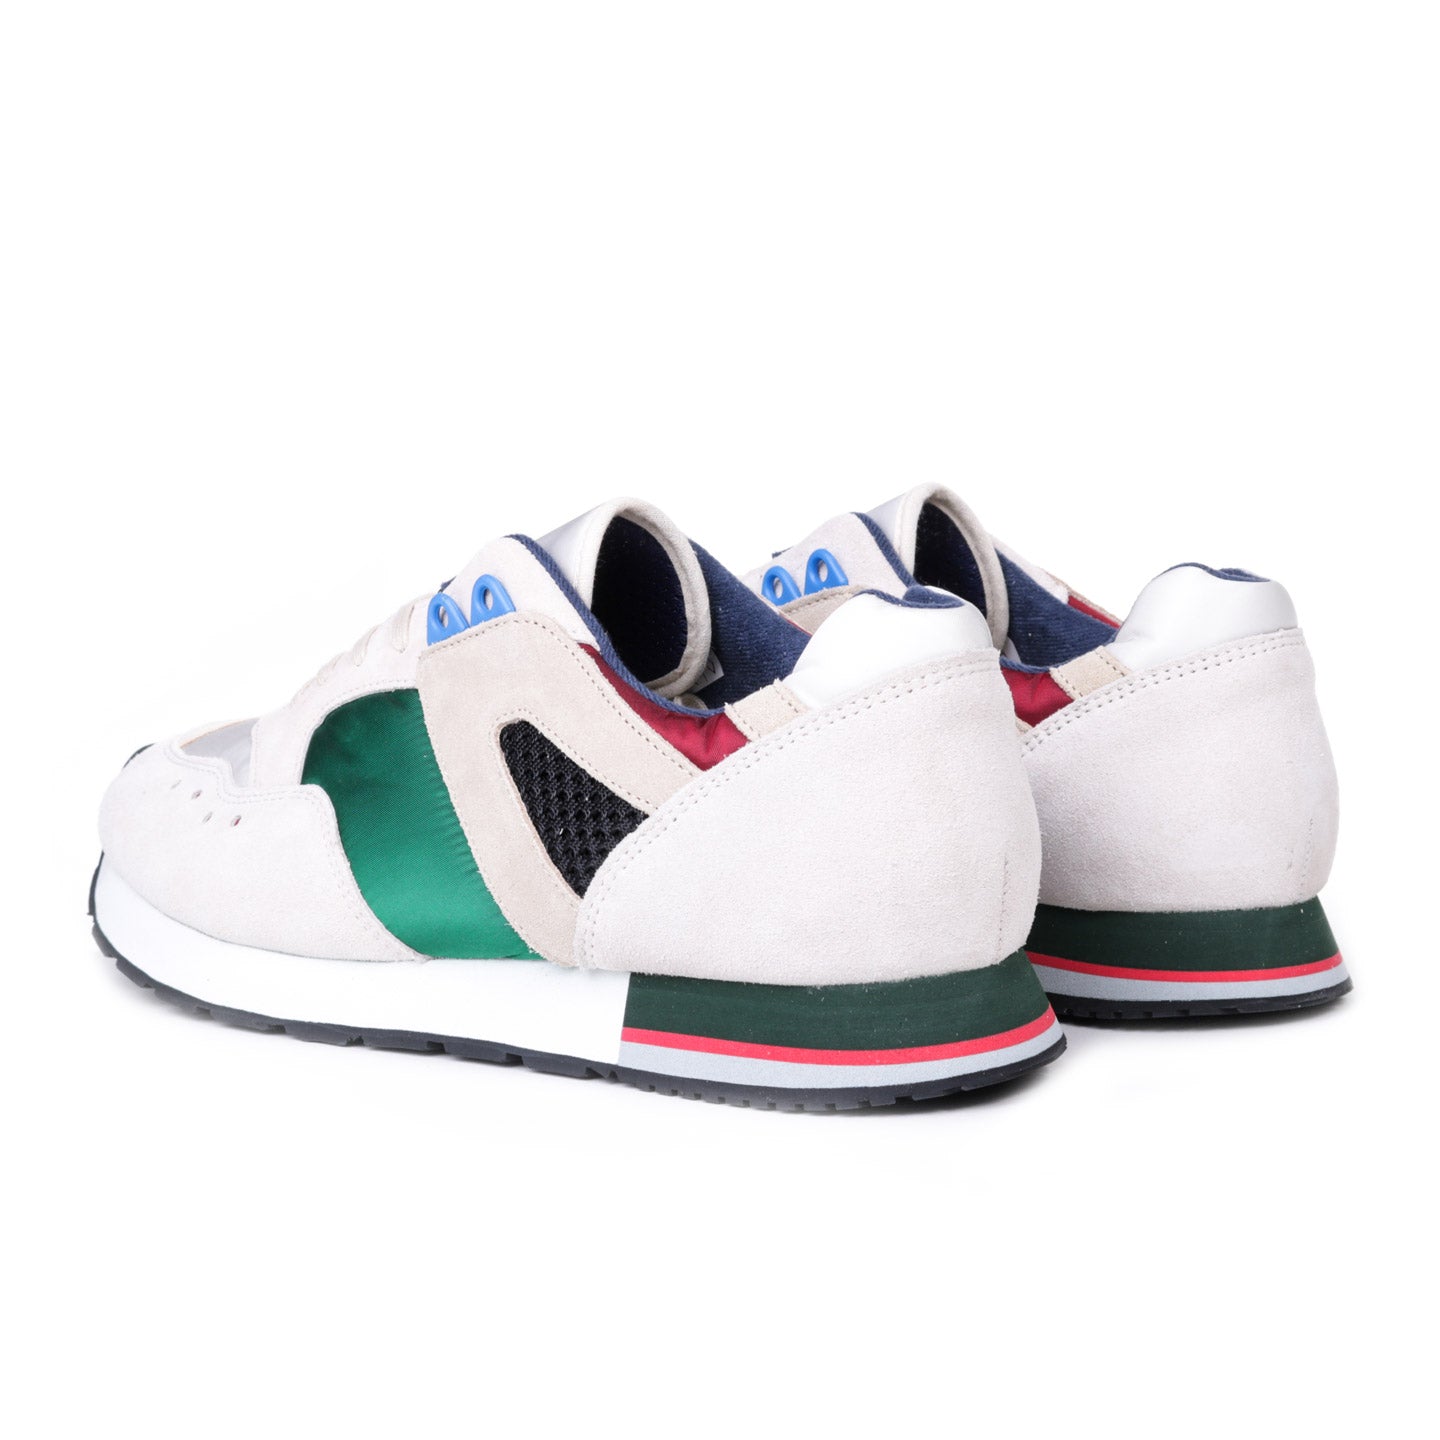 REPRODUCTION OF FOUND FRENCH MILITARY TRAINER GREEN / OFF WHITE